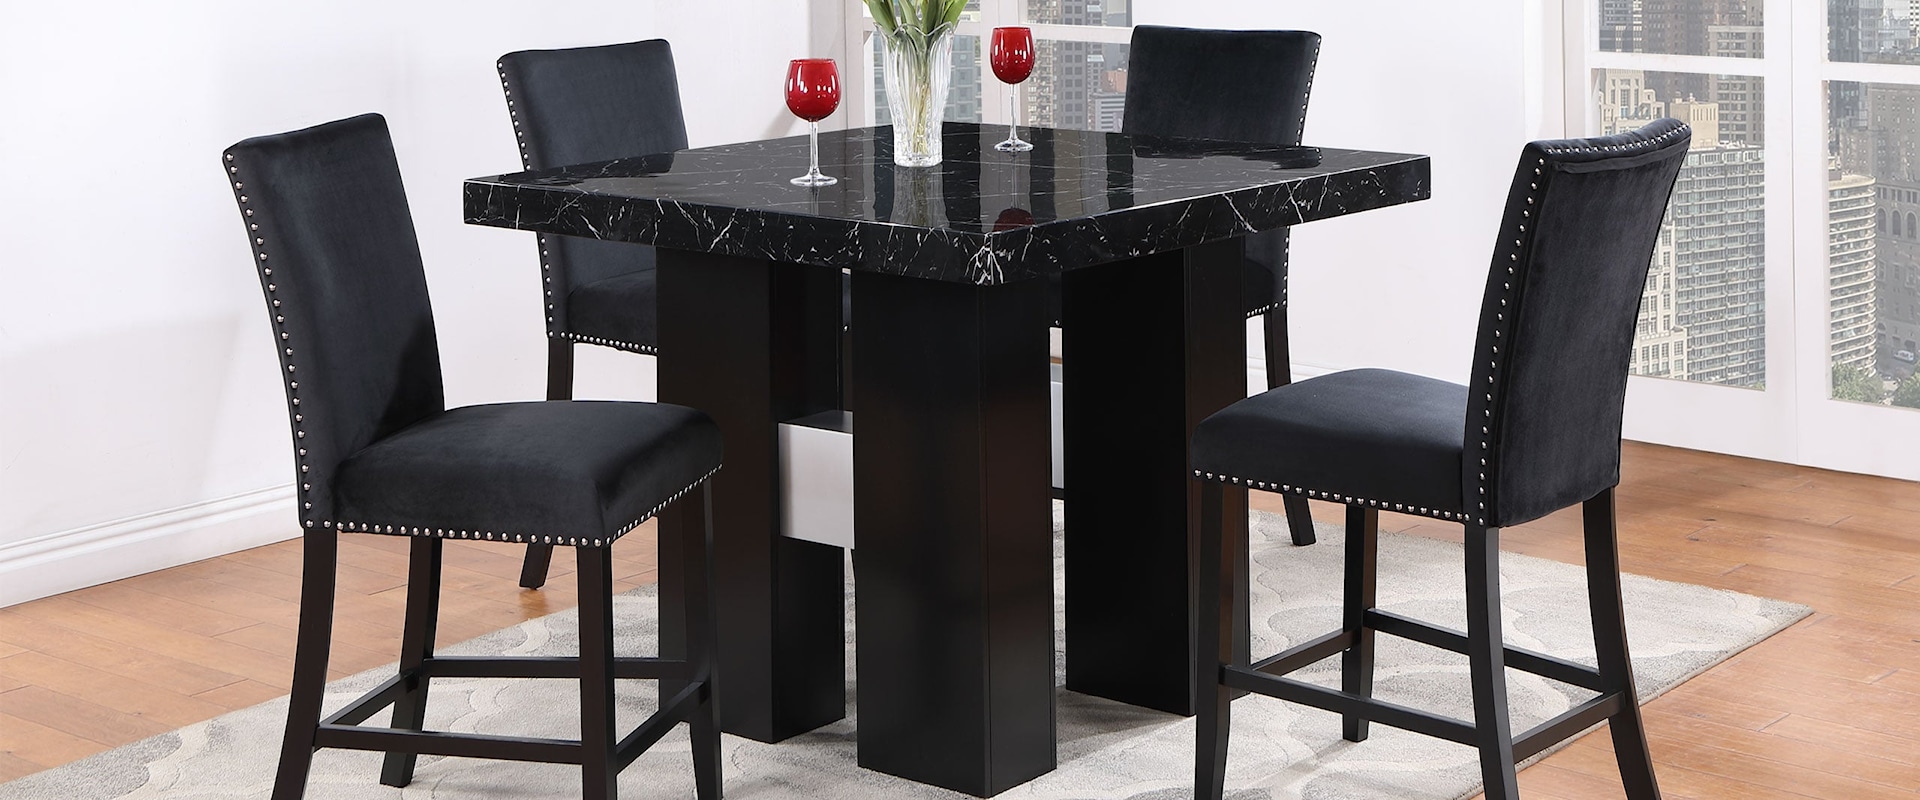 Contemporary Bar Table with Black Faux Marble Top and 4 Bar Stools